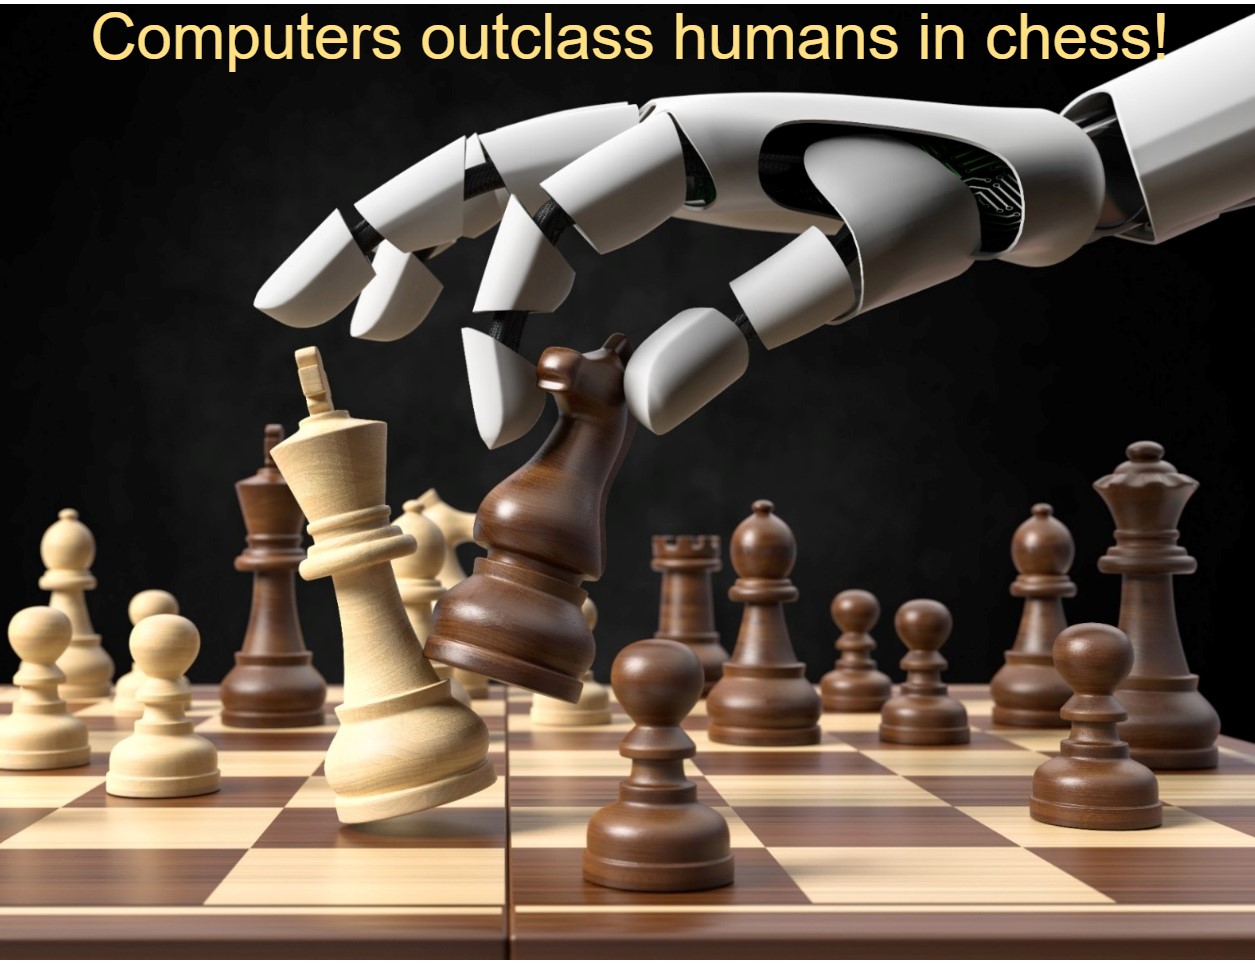 Why do computers outclass humans in chess?